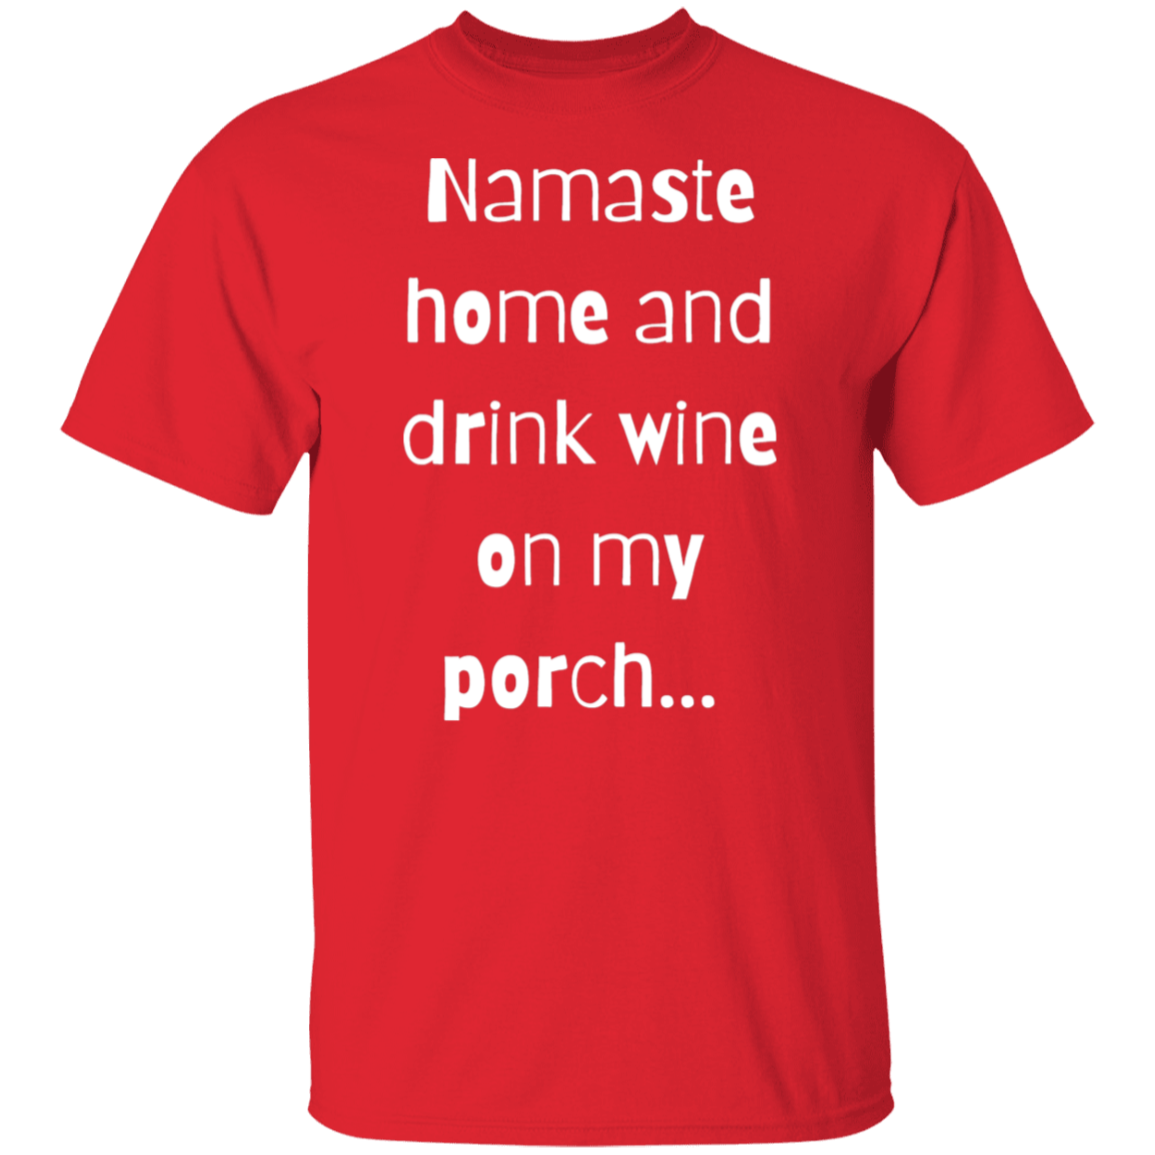 Namaste Home and drink on my porch T-Shirt